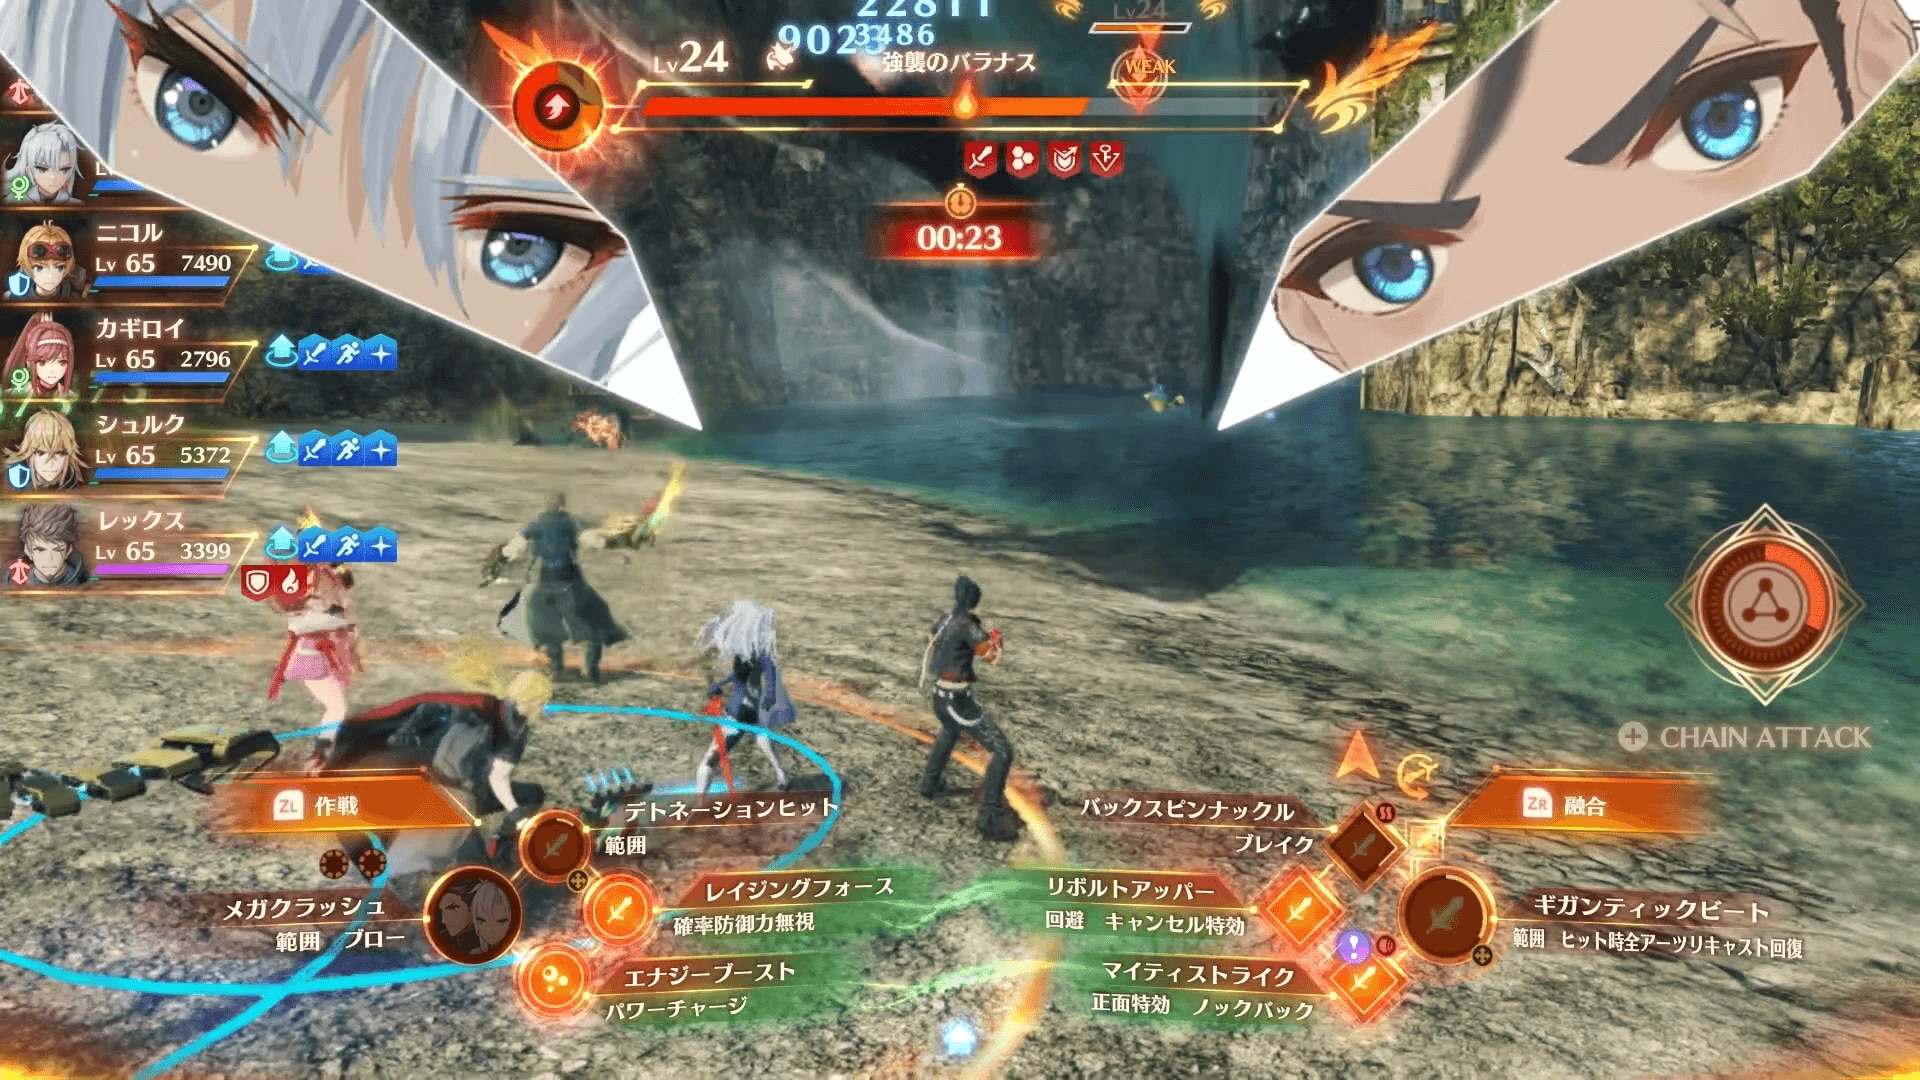 Xenoblade Chronicles 3 Review – The Beginning and the End